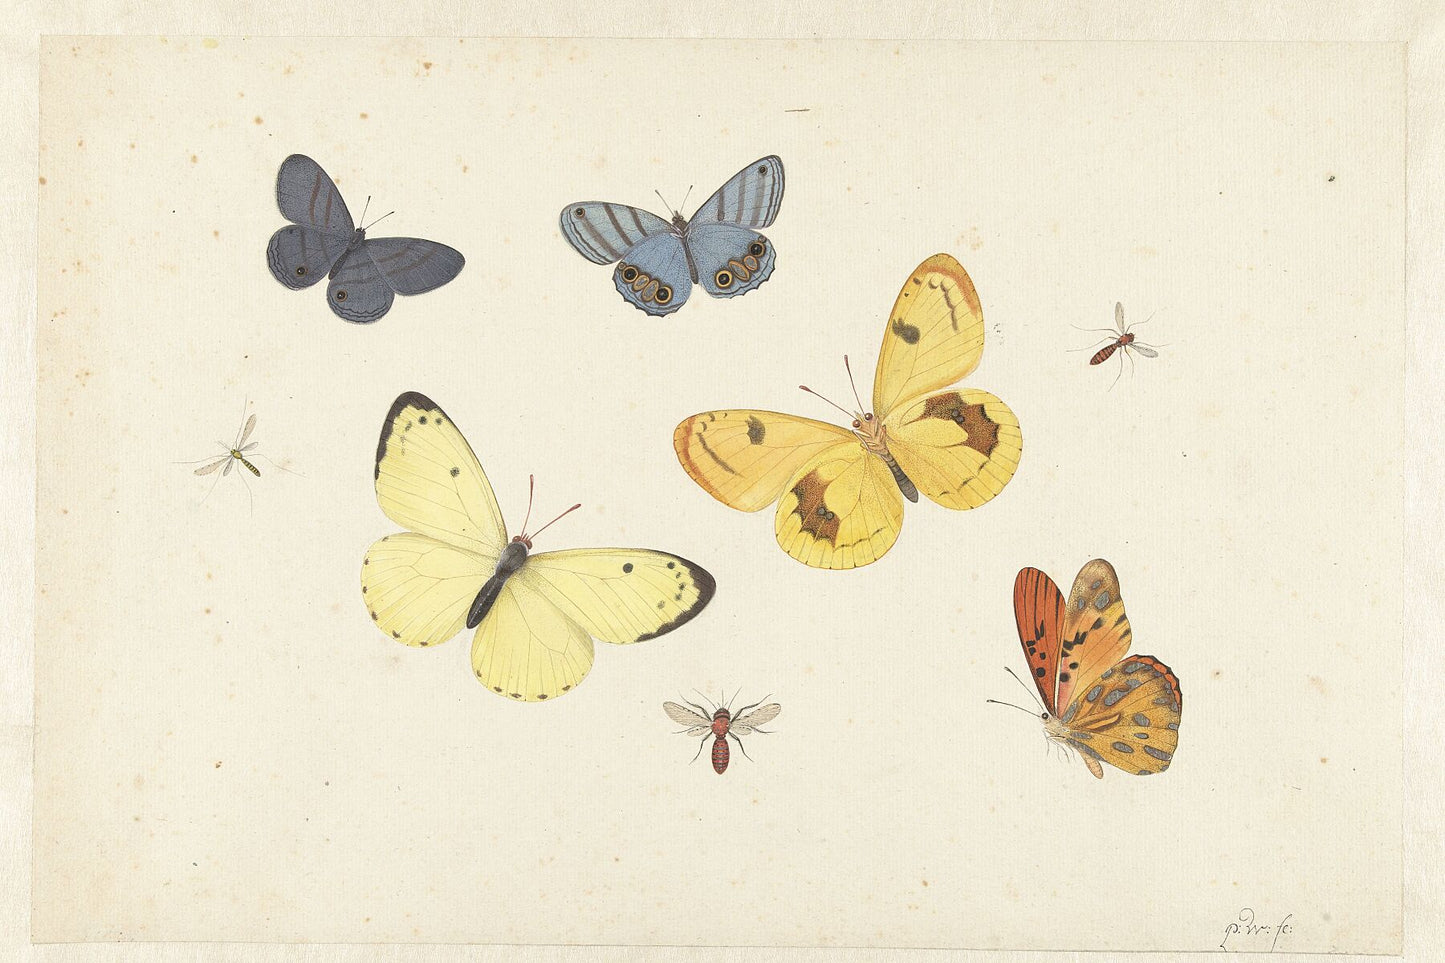 Sheet of Studies with Five Butterflies, a Wasp, and Two Flies by Pieter Withoos - c. 1680